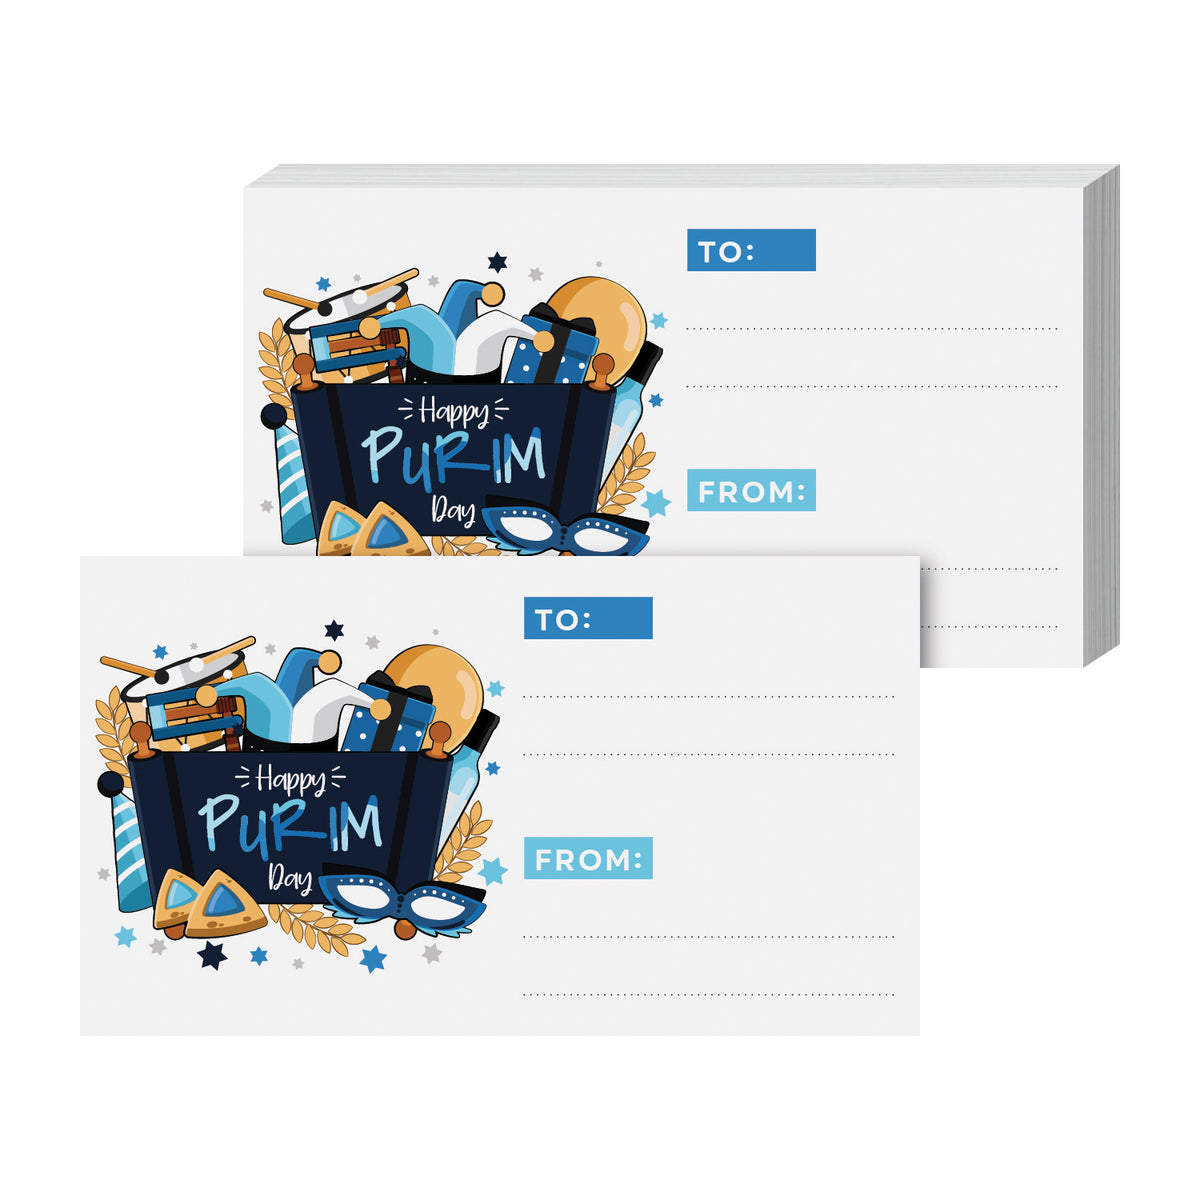 Happy Purim Blank Gift Tags, 3.5" x 2" To From Jewish Holiday Religious Greeting Note Cards for Gifts Presents – 25 per Pack